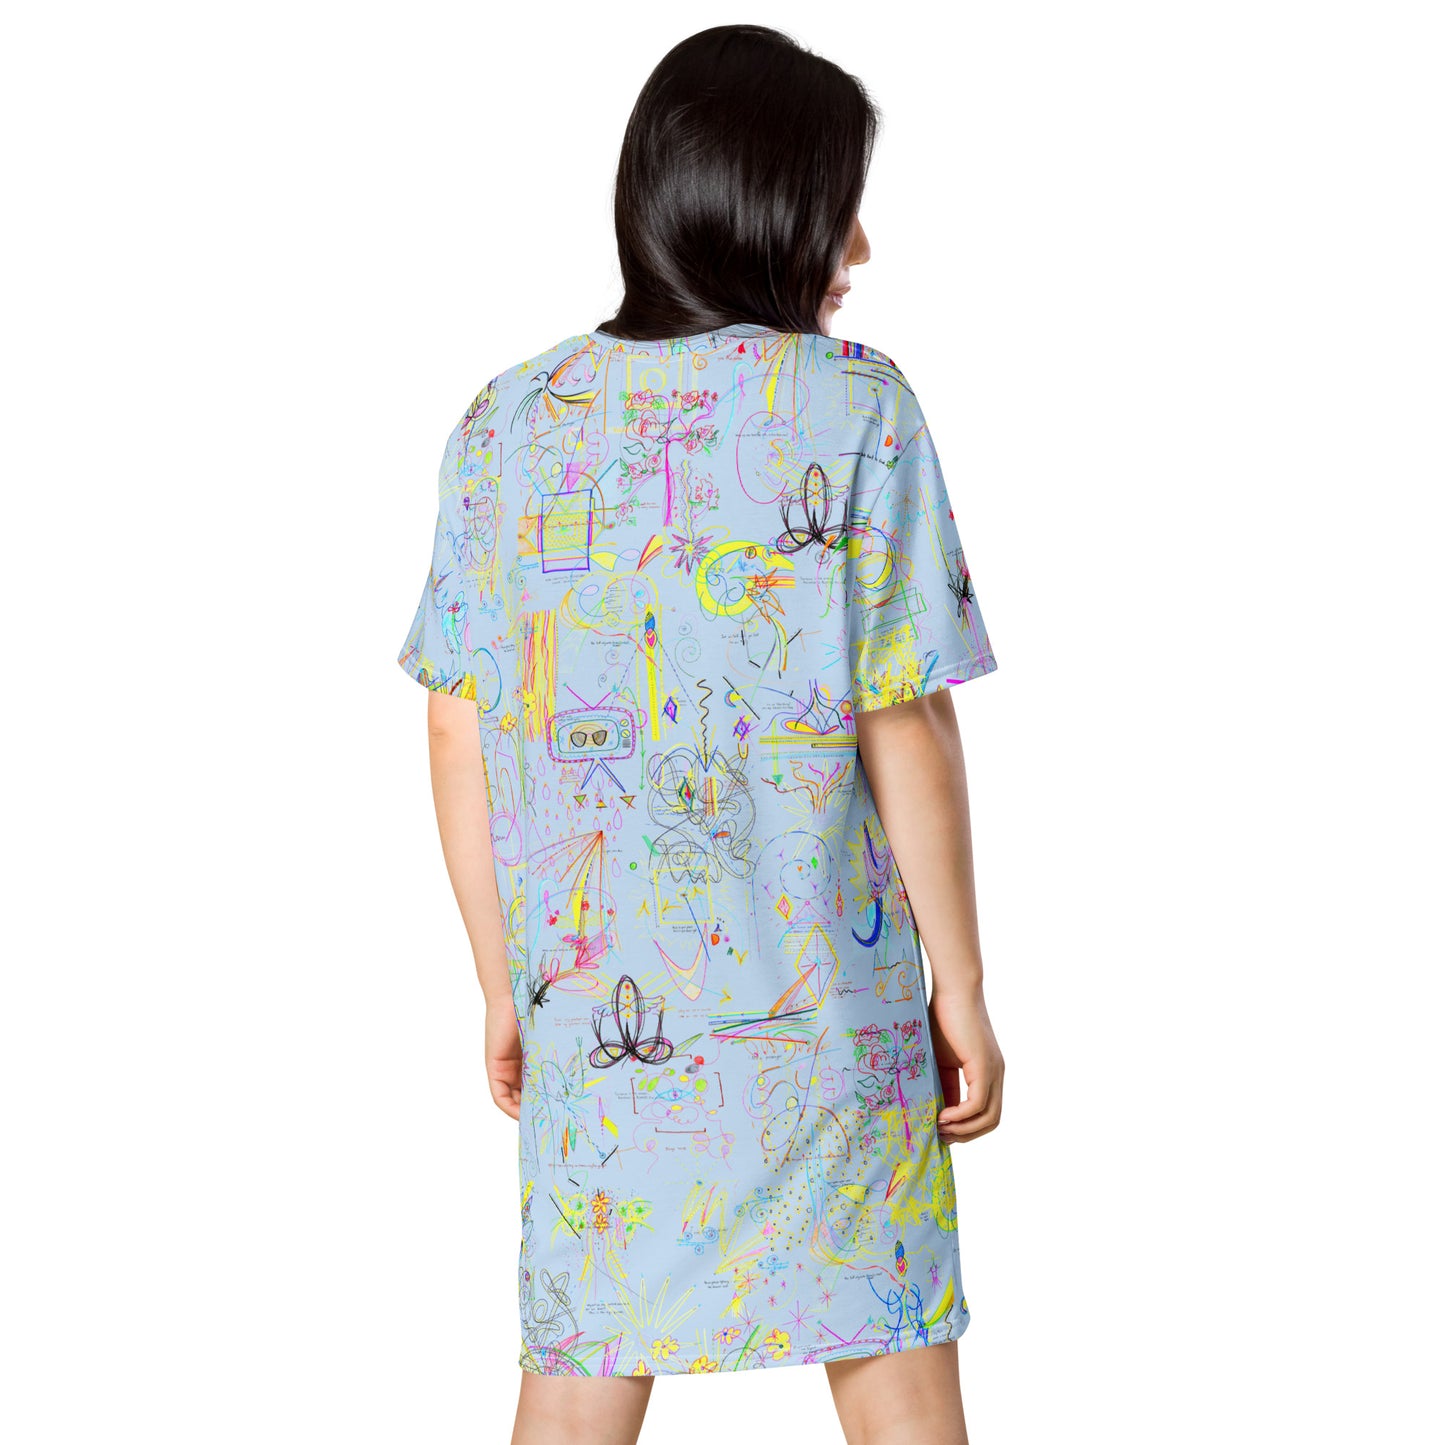 smell the roses in every dimension, T-shirt dress in light blue